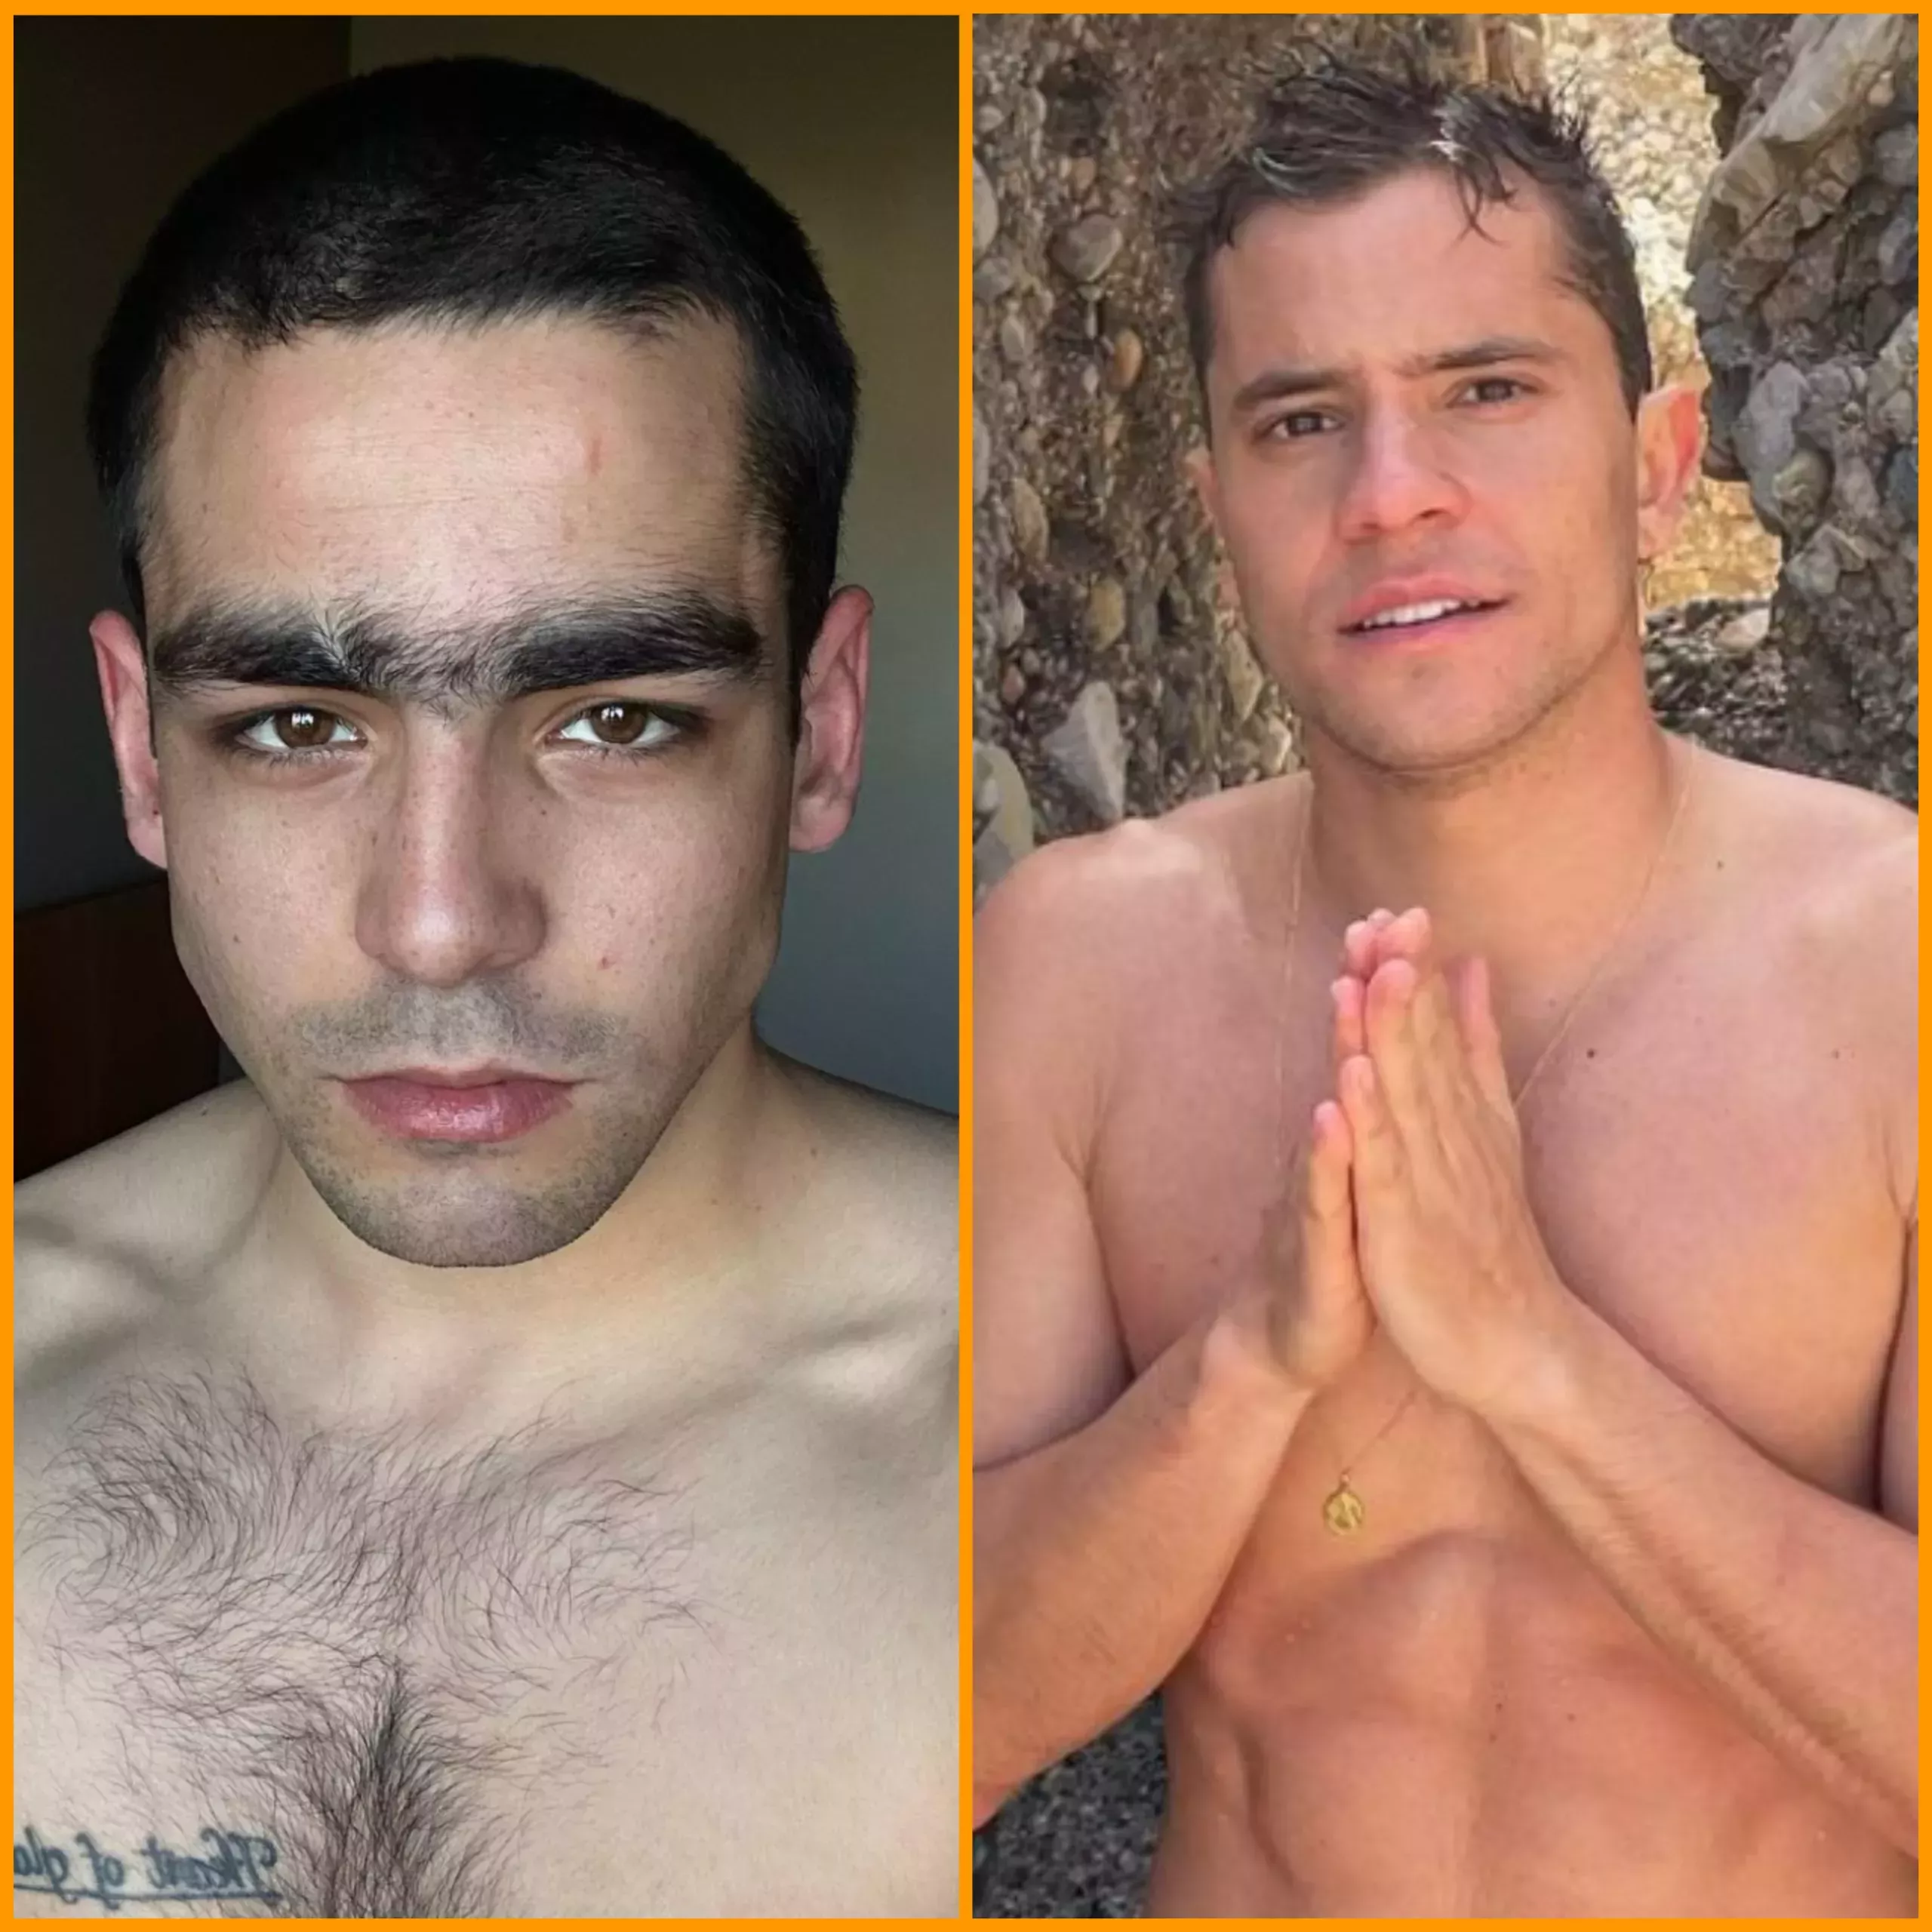 Omar Ayuso and Andre Lamoglia in shirtless selfies